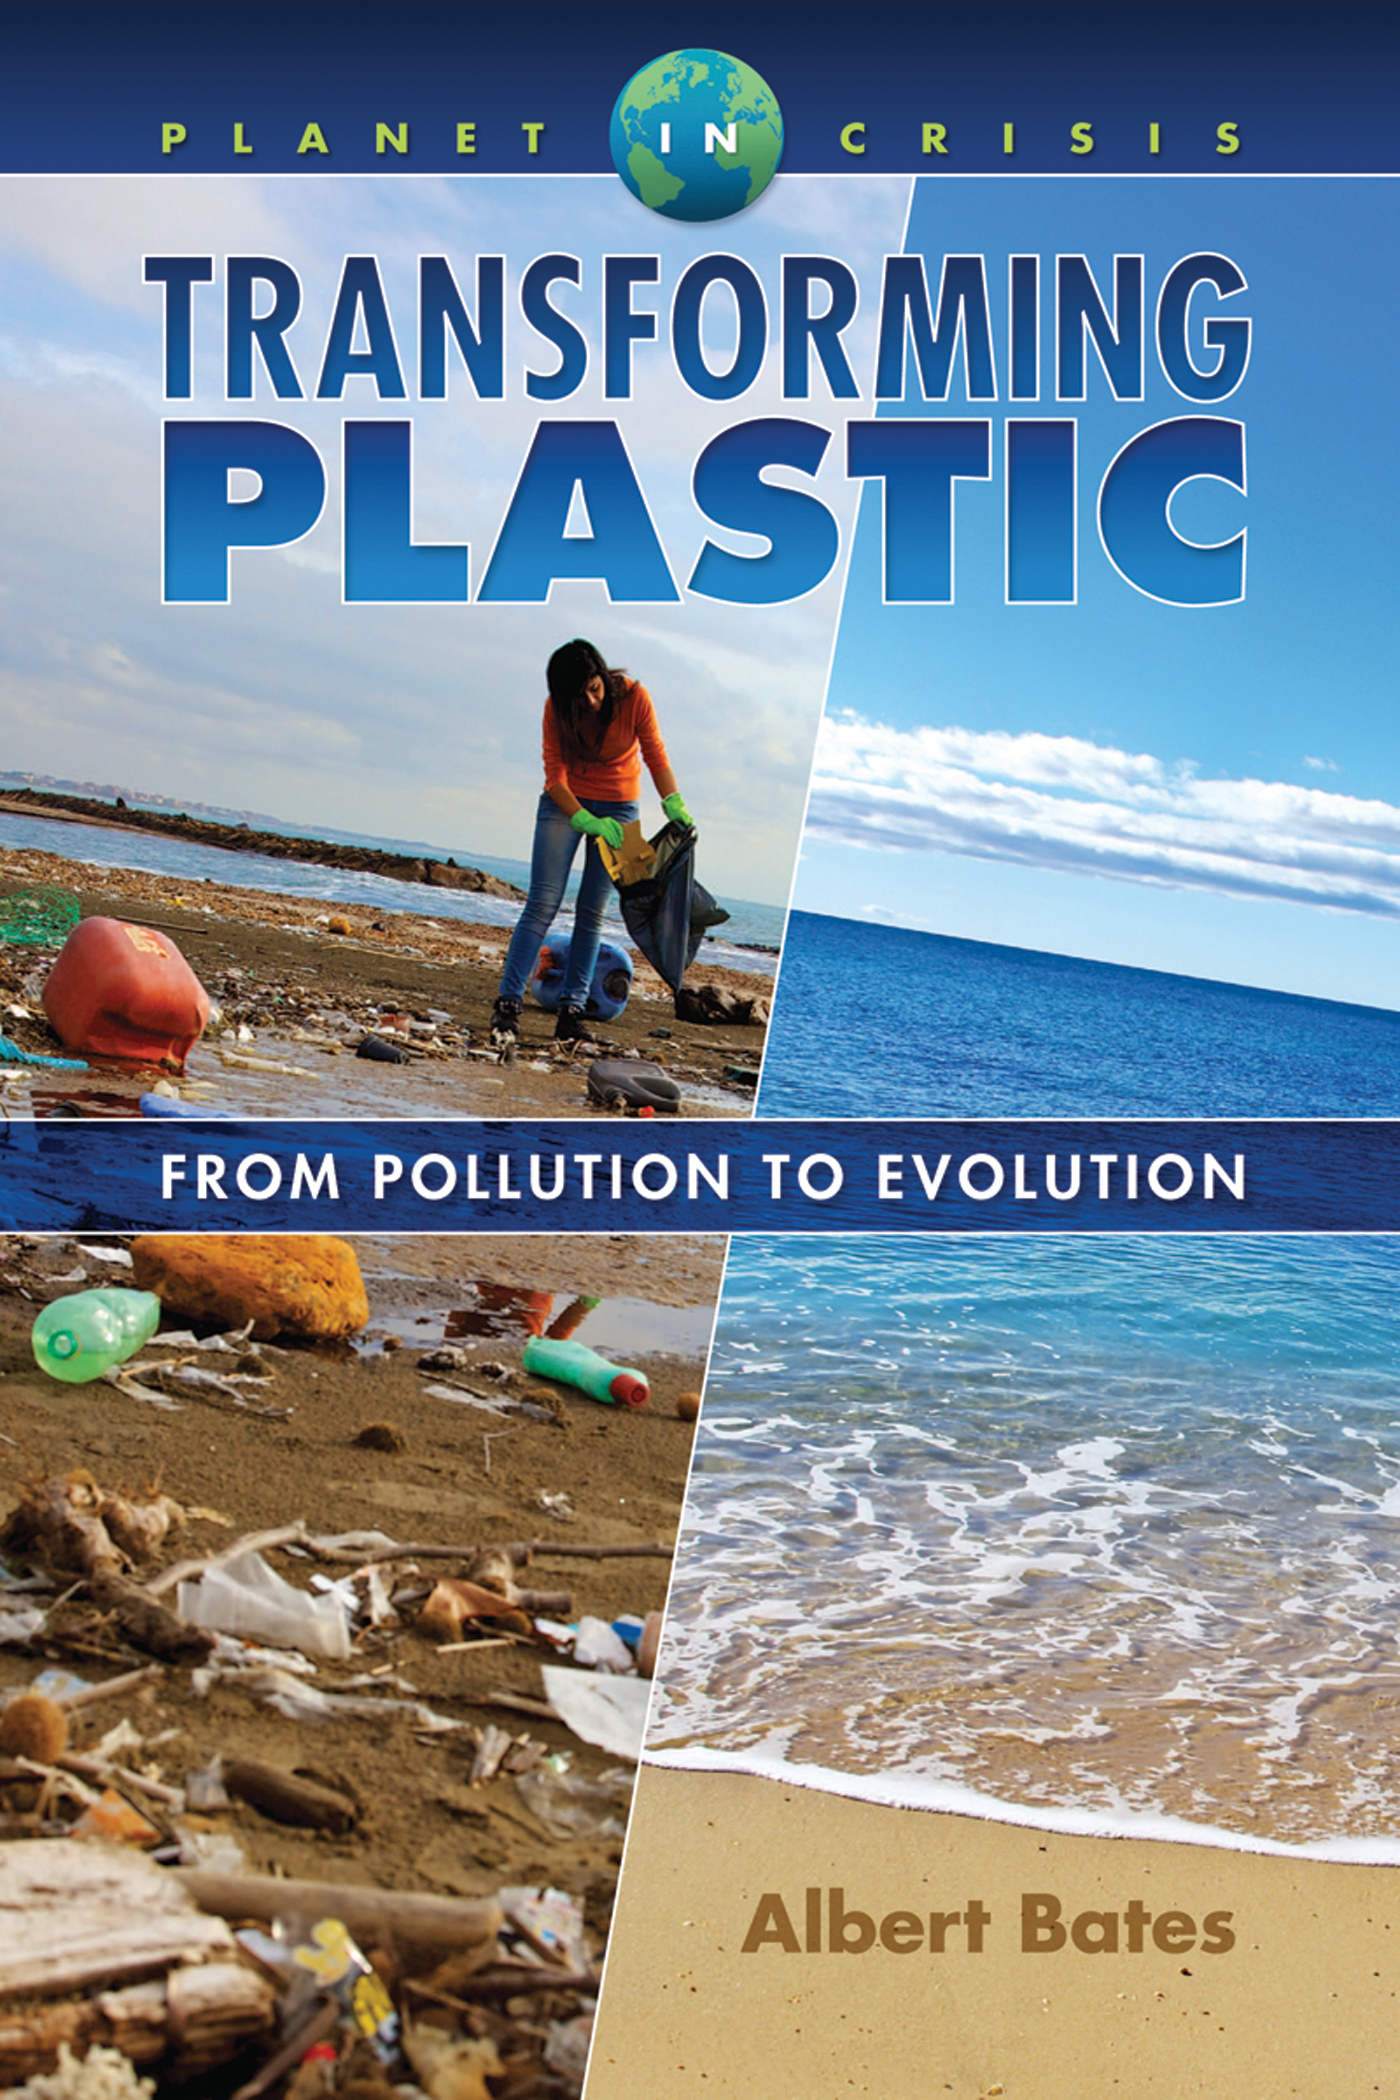 TRANSFORMING PLASTIC FROM POLLUTION TO EVOLUTION Albert Bates GroundSwell - photo 1